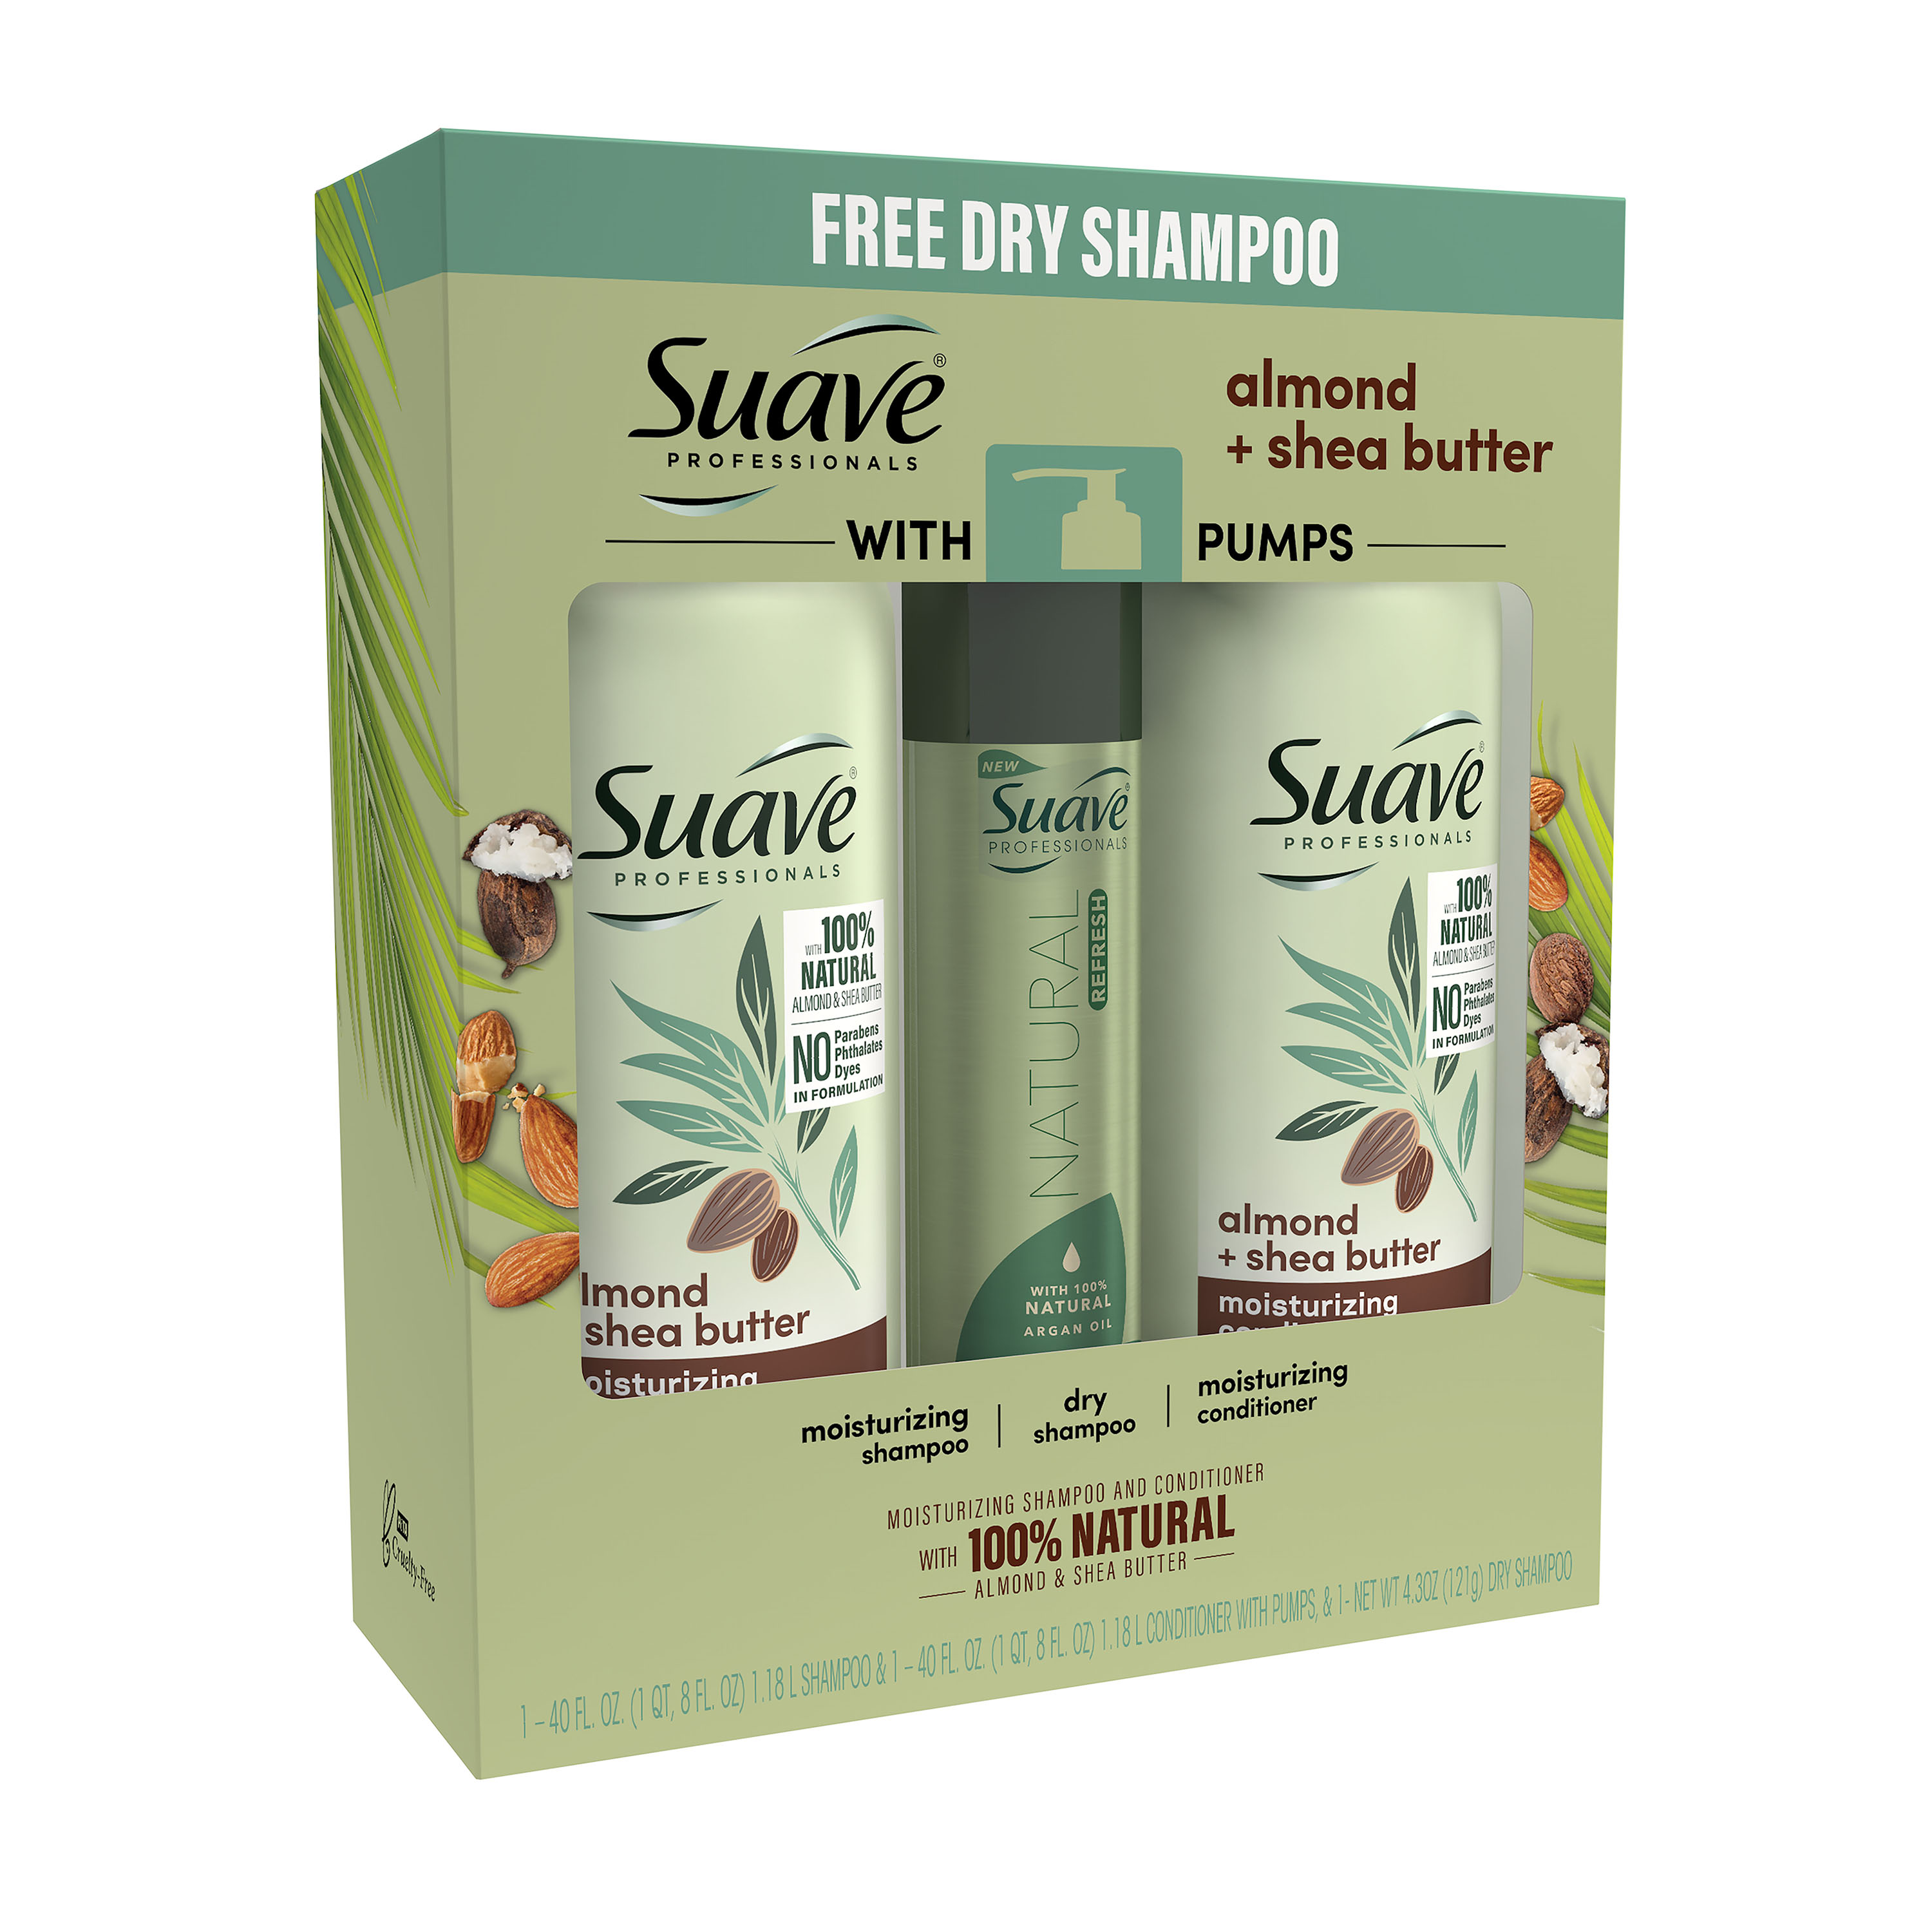 ($13 Value) Suave Professionals Shampoo and Conditioner Holiday Gift Set, Almond and Shea Butter, 3 Piece - image 3 of 5